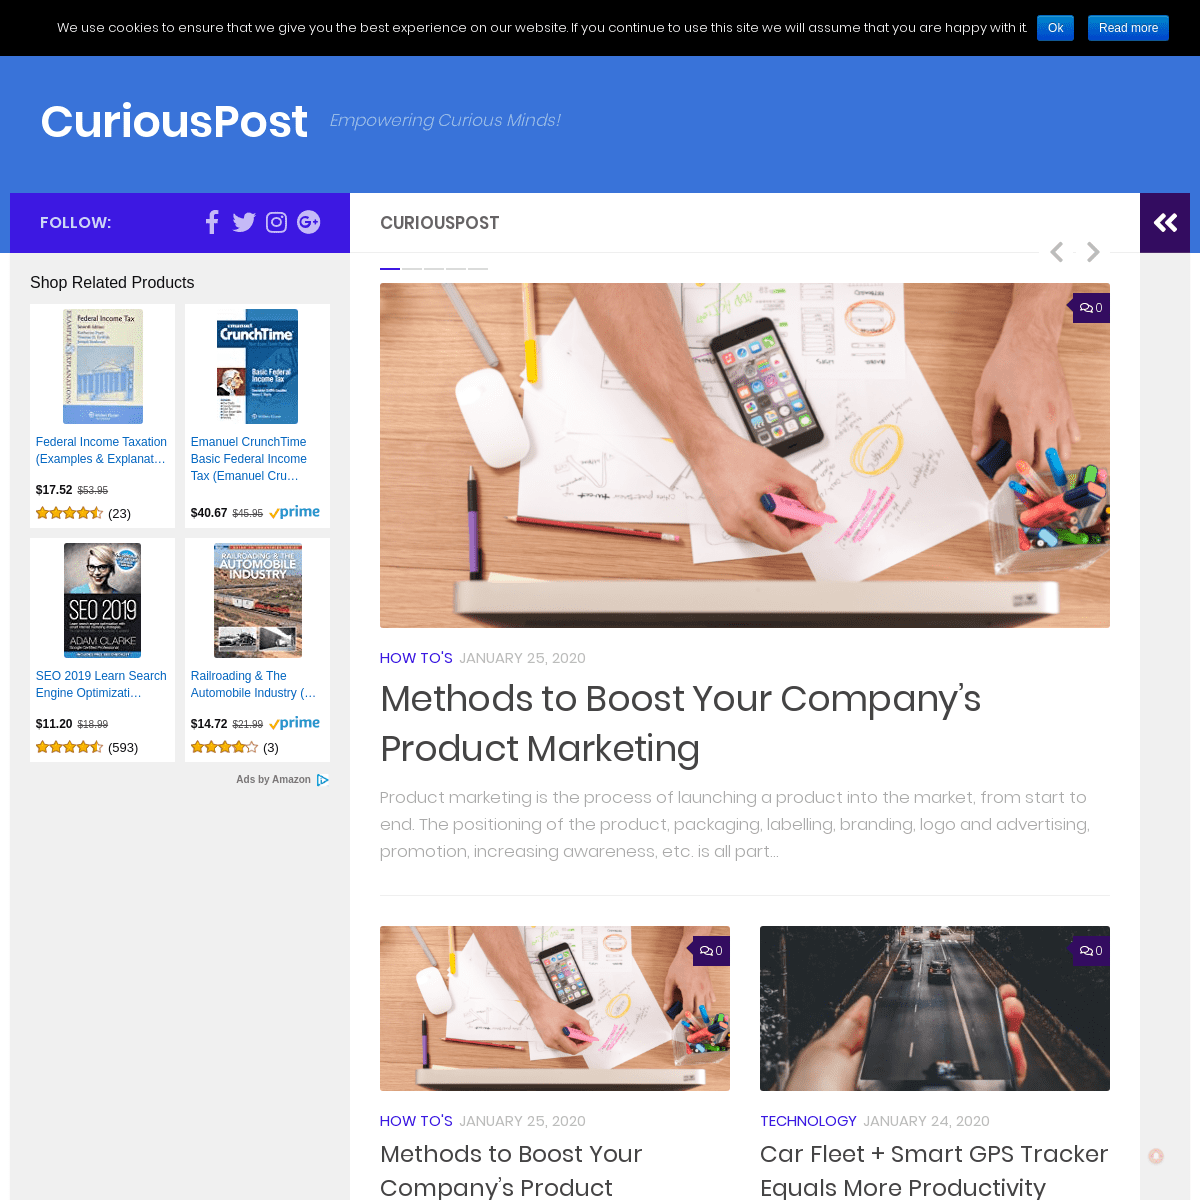 A complete backup of curiouspost.com